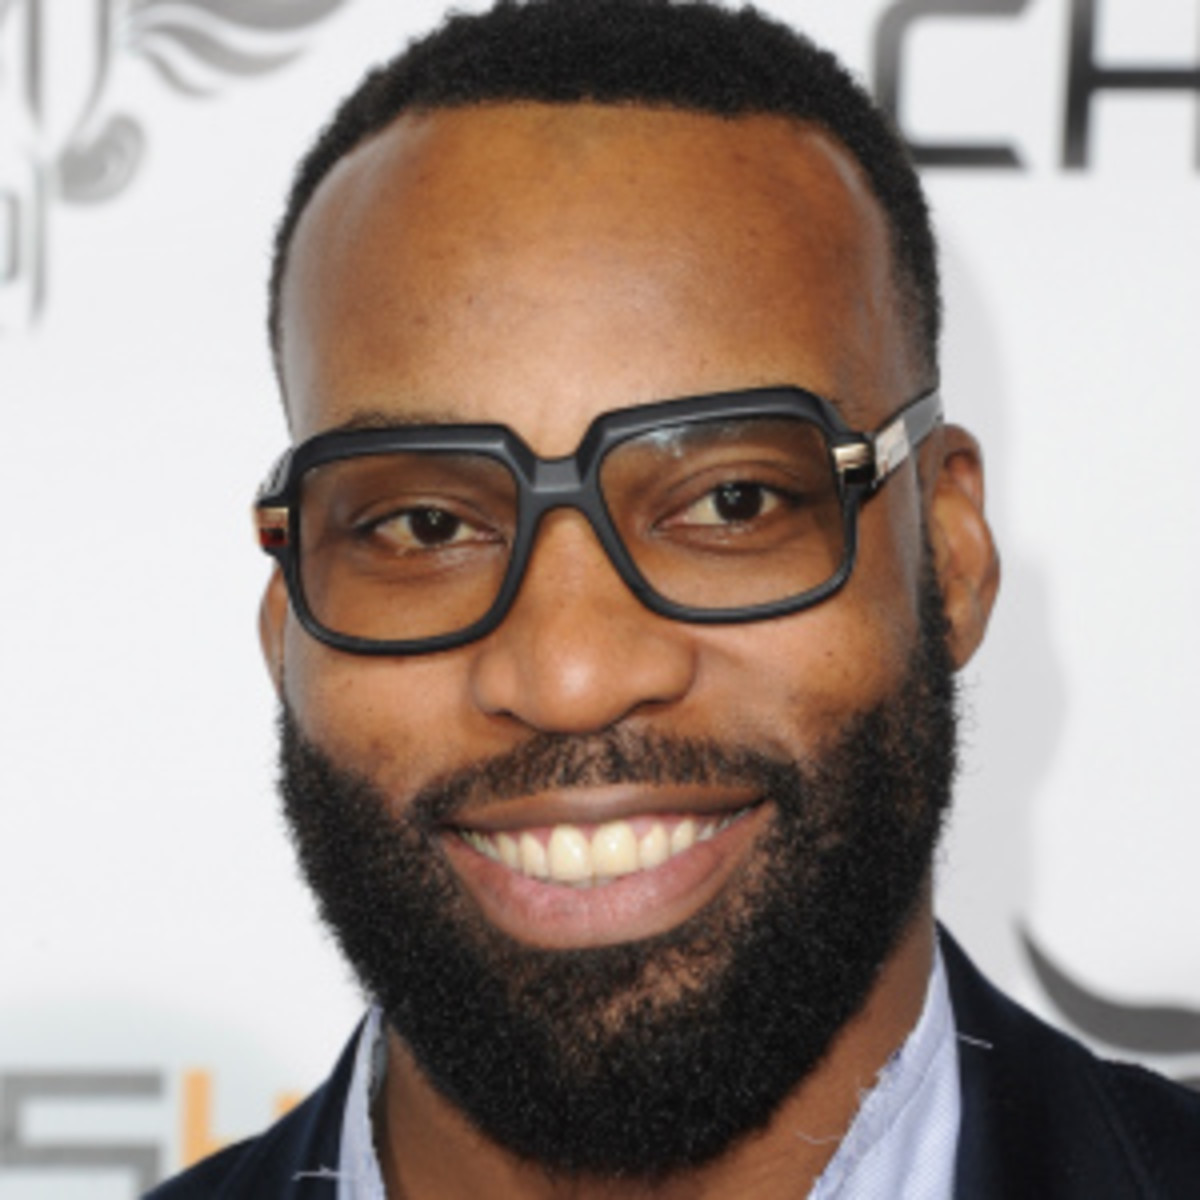 Baron Davis will host a television show on the newly launched Esquire Network. (Allen Berezovsky/Getty Images)